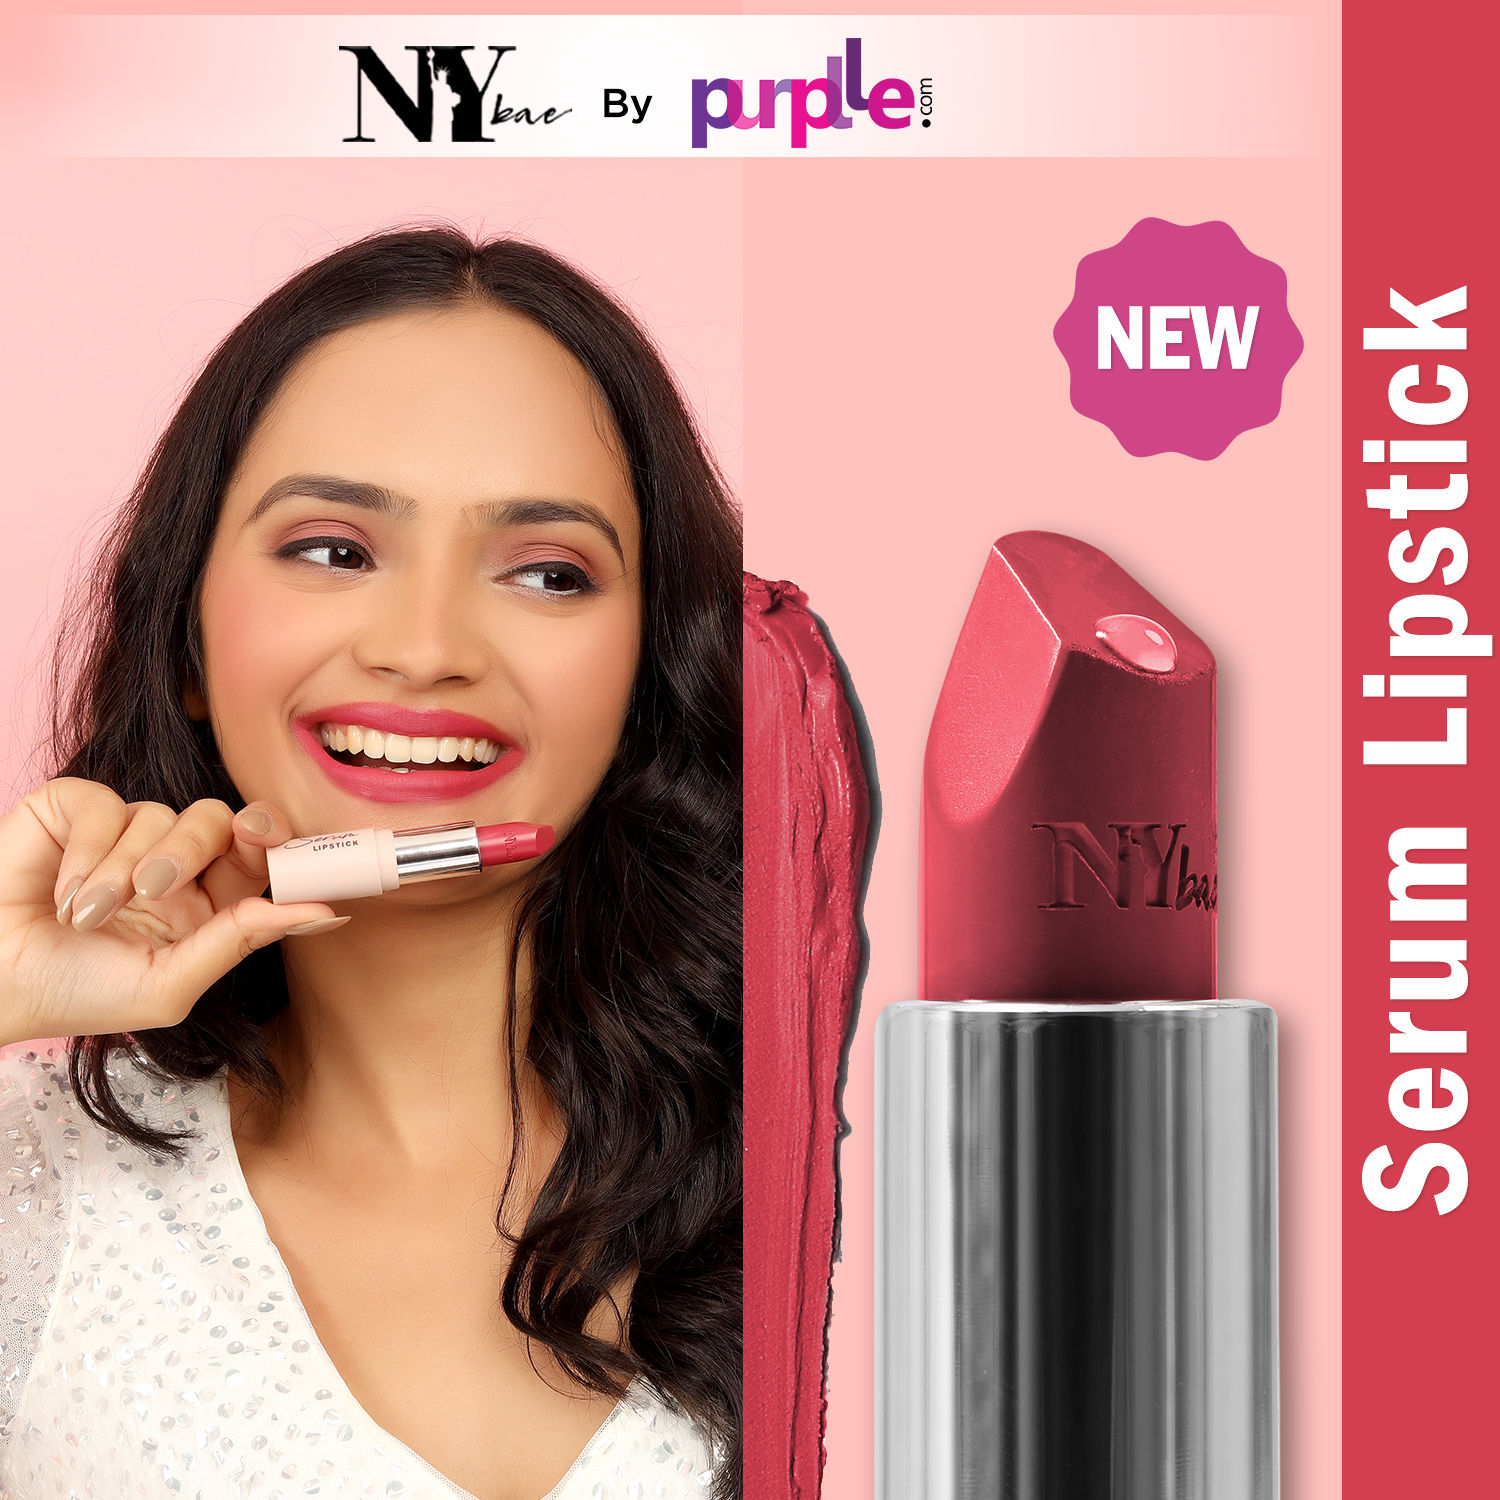 NY Bae Runway Serum Lipstick - Pink Pool 04 (4.2 g) | Pink | Highly Pigmented | Vitamin E & Fruit Oils | Lightweight | Non-Drying